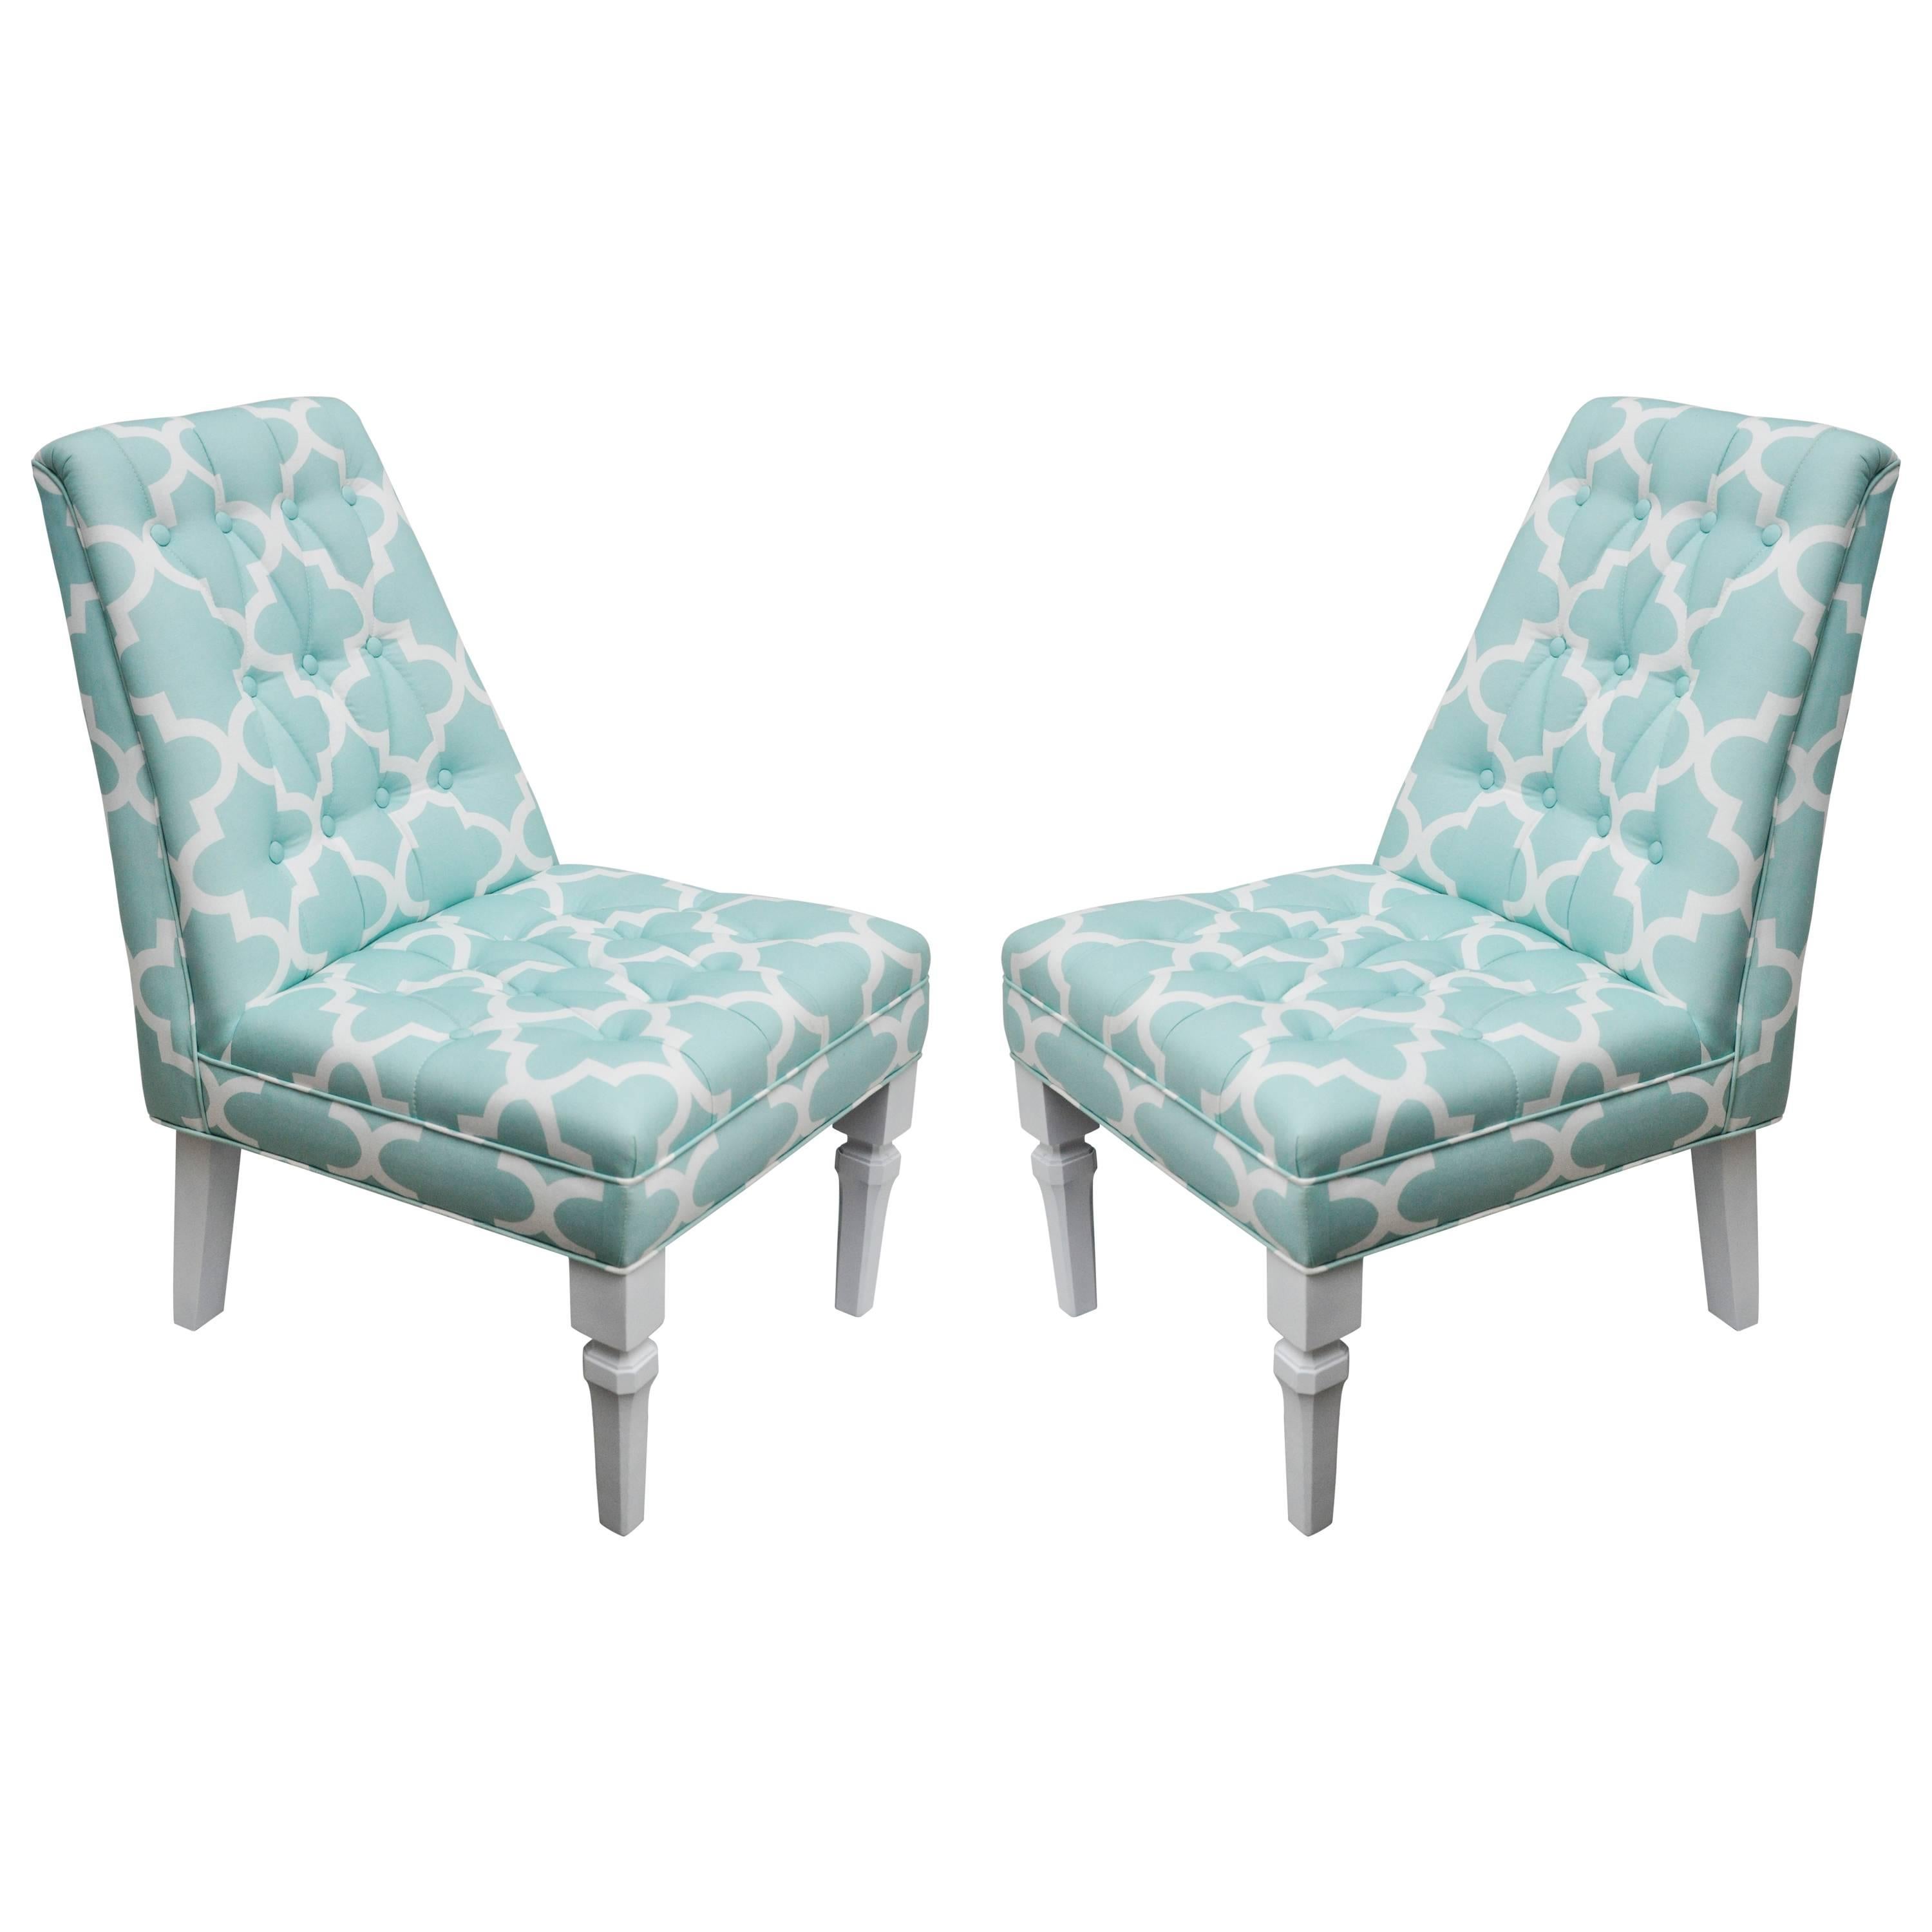 Vintage Moroccan Style Pr of Turquoise/White Upholstered Chairs For Sale